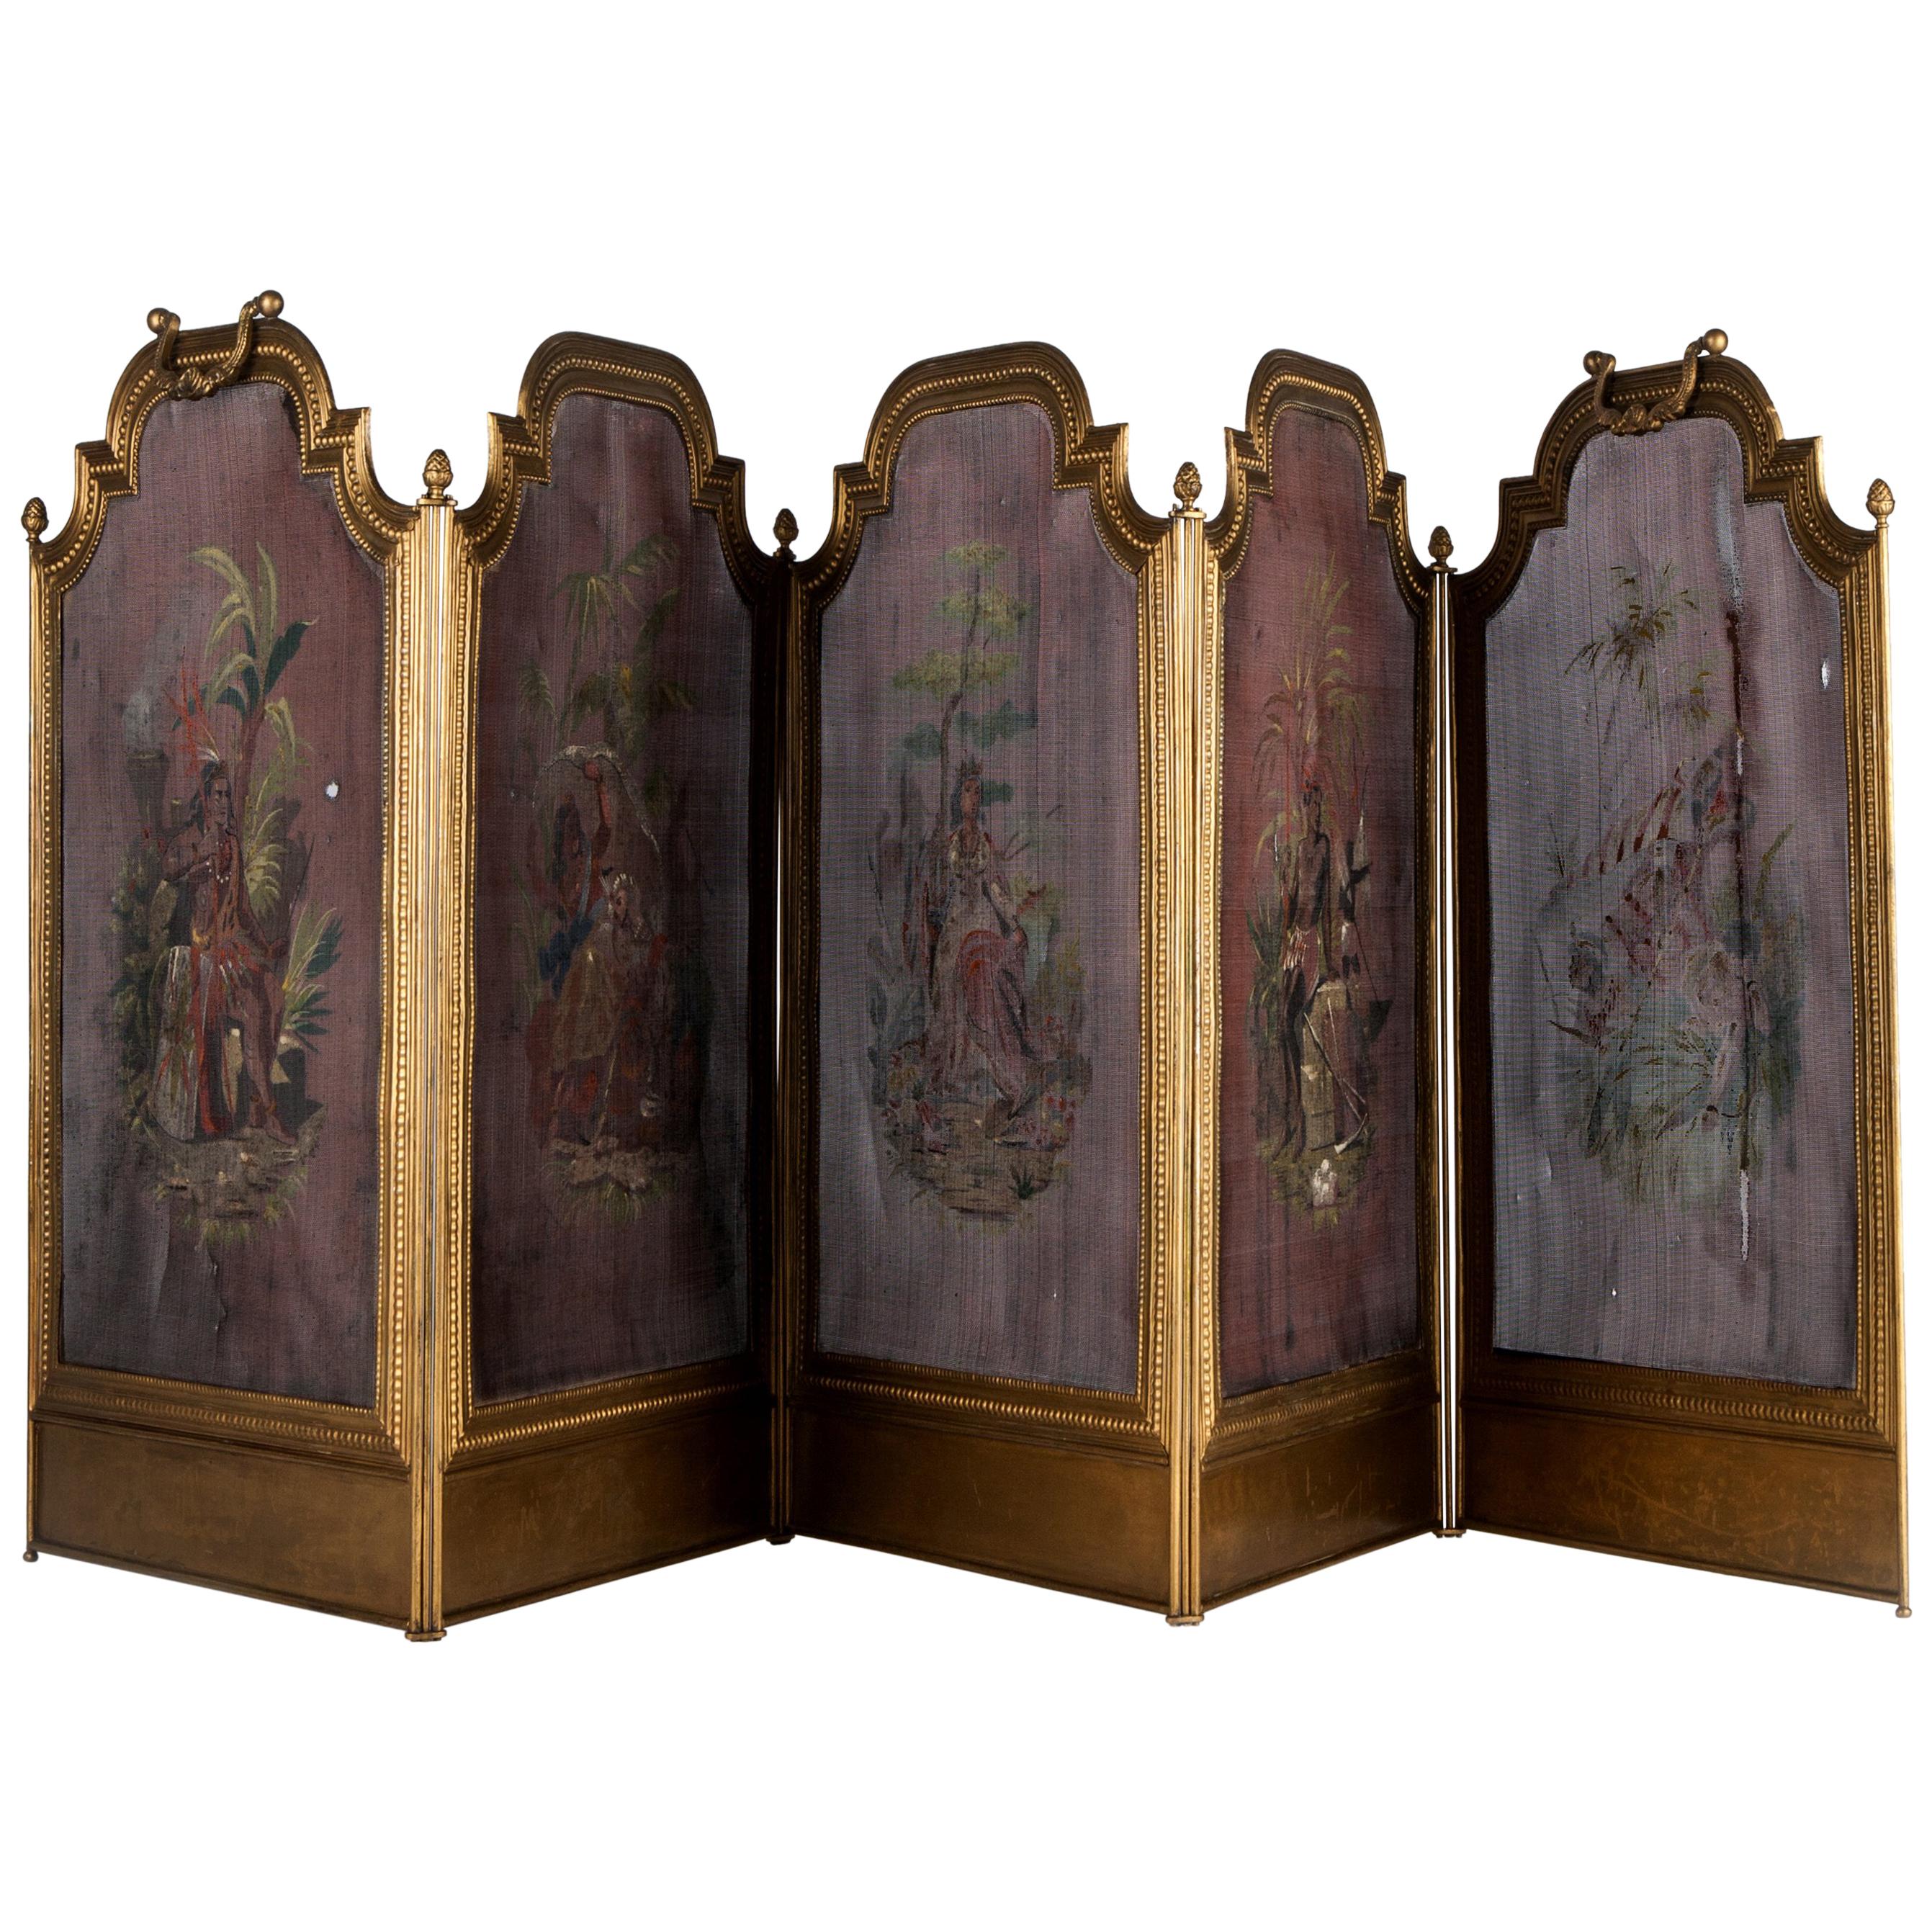 5-Panel Hand Painted Iron Fireplace Screen Featuring "The Americas", circa 1920